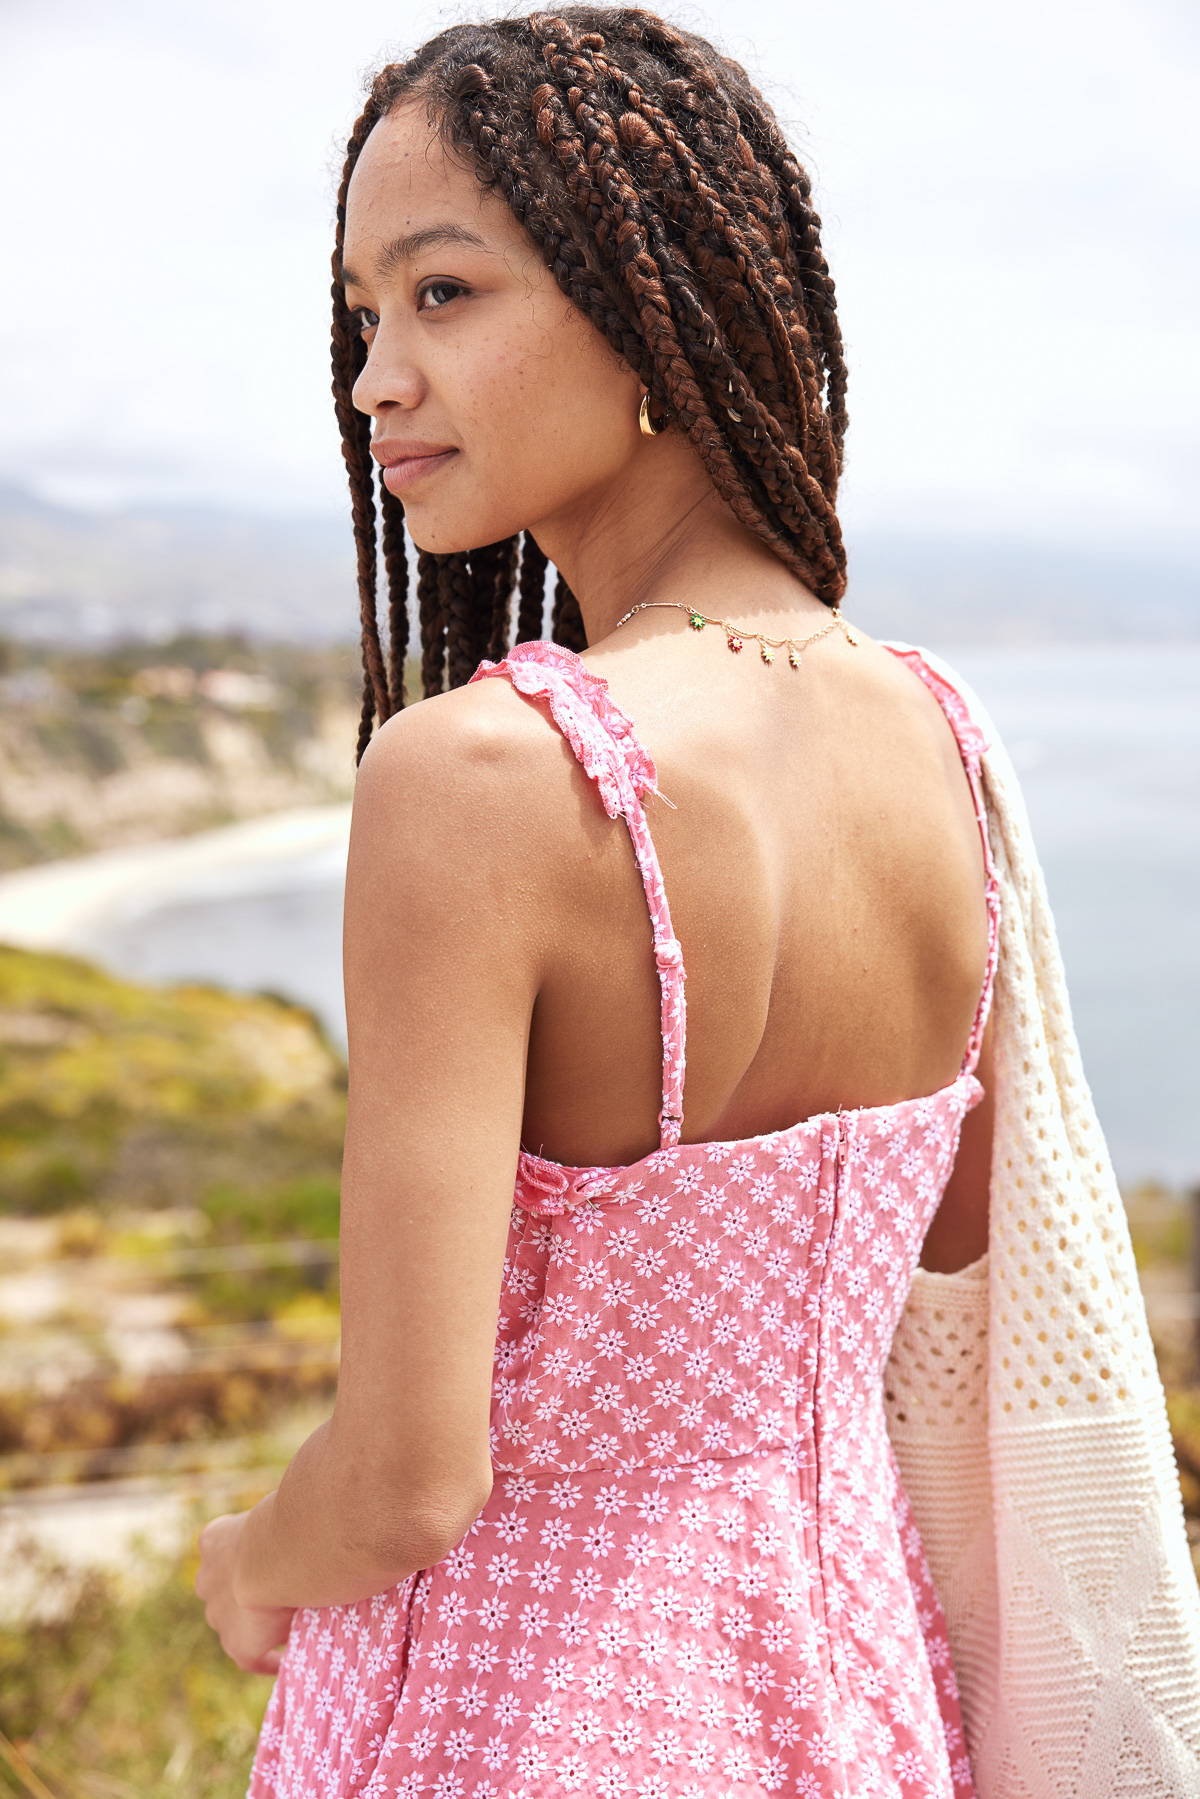 Trixxi sun-kissed summer, girl at oceanside beach cliff in a pink embroidered tank skater dress.